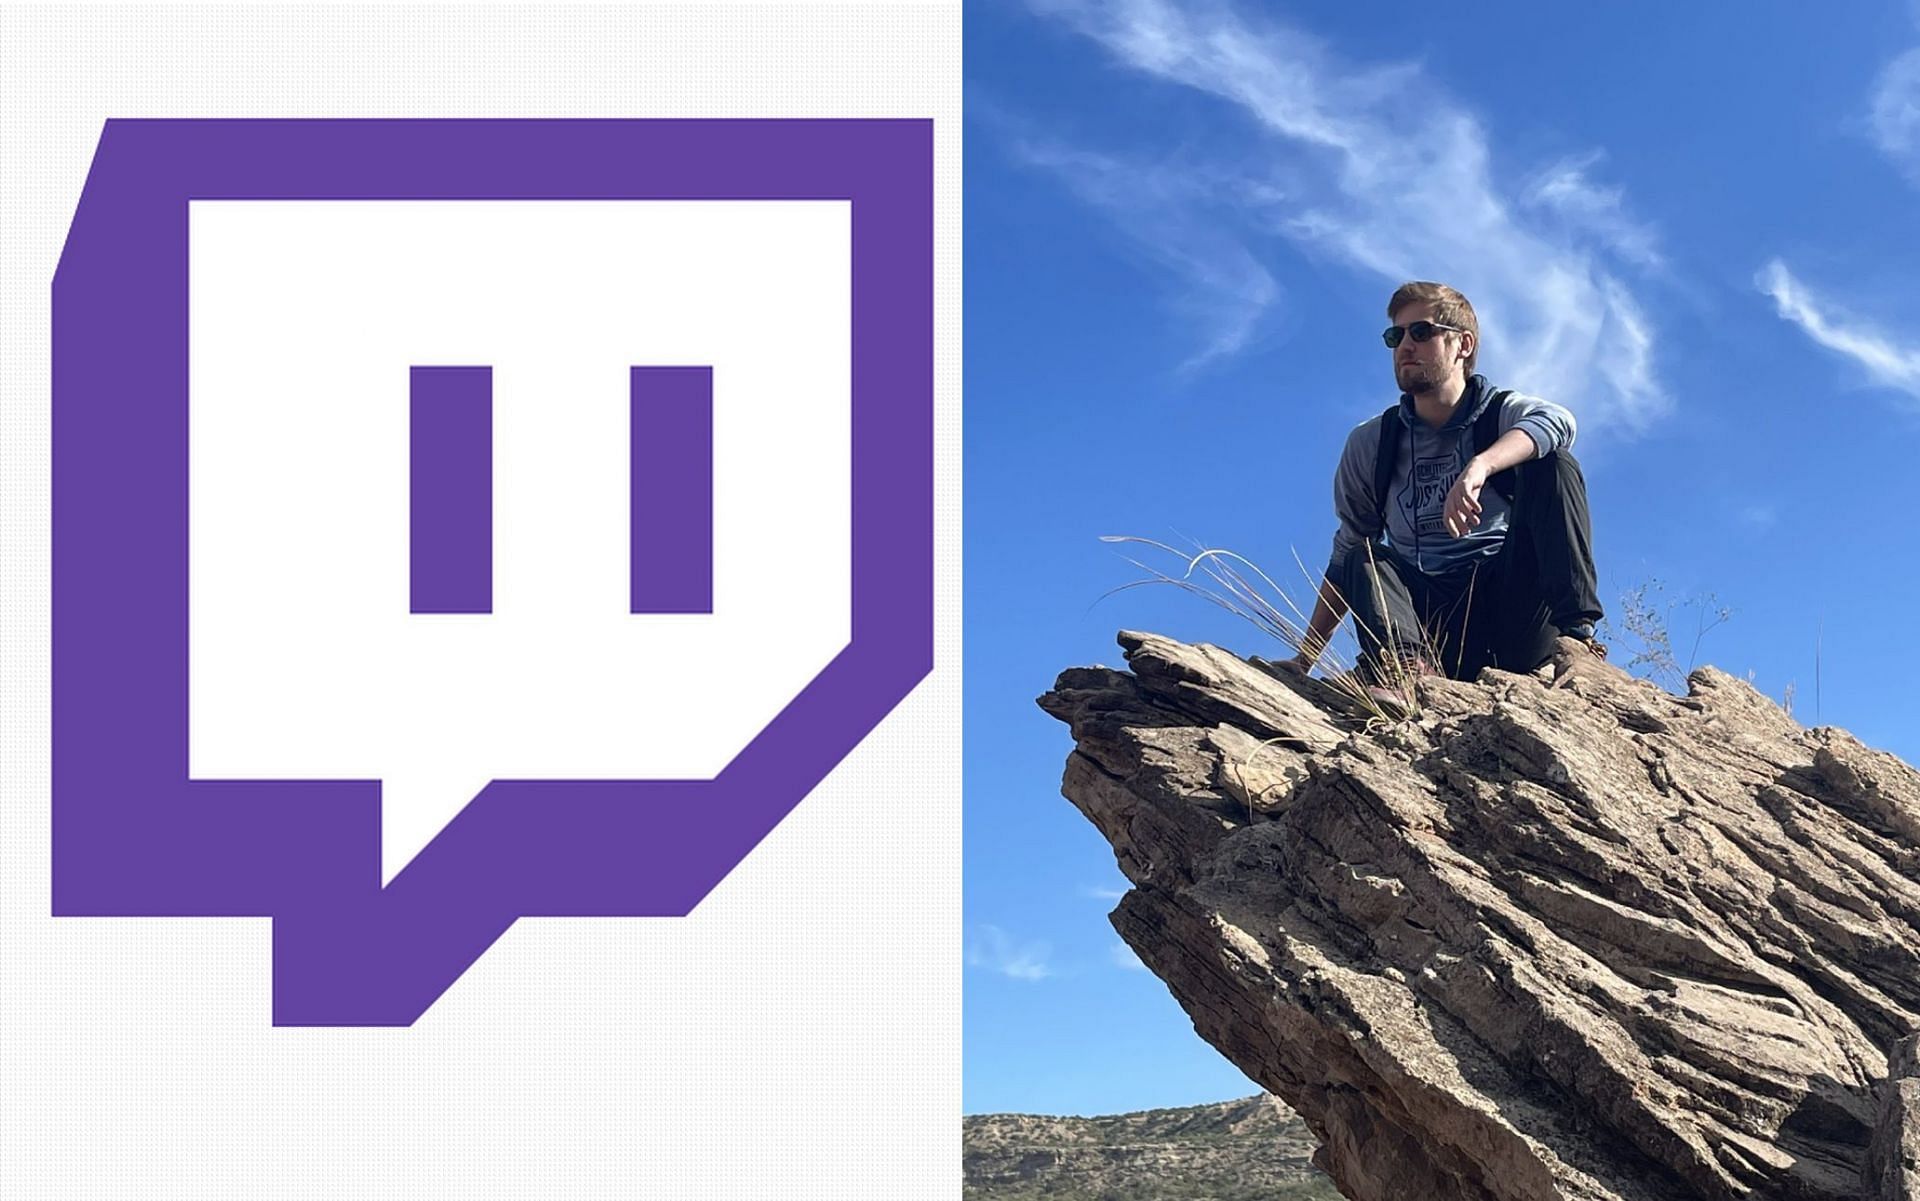 Sodapoppin has been unbanned after 14 days on Twitch (Image via Sodapoppin/Twitter)